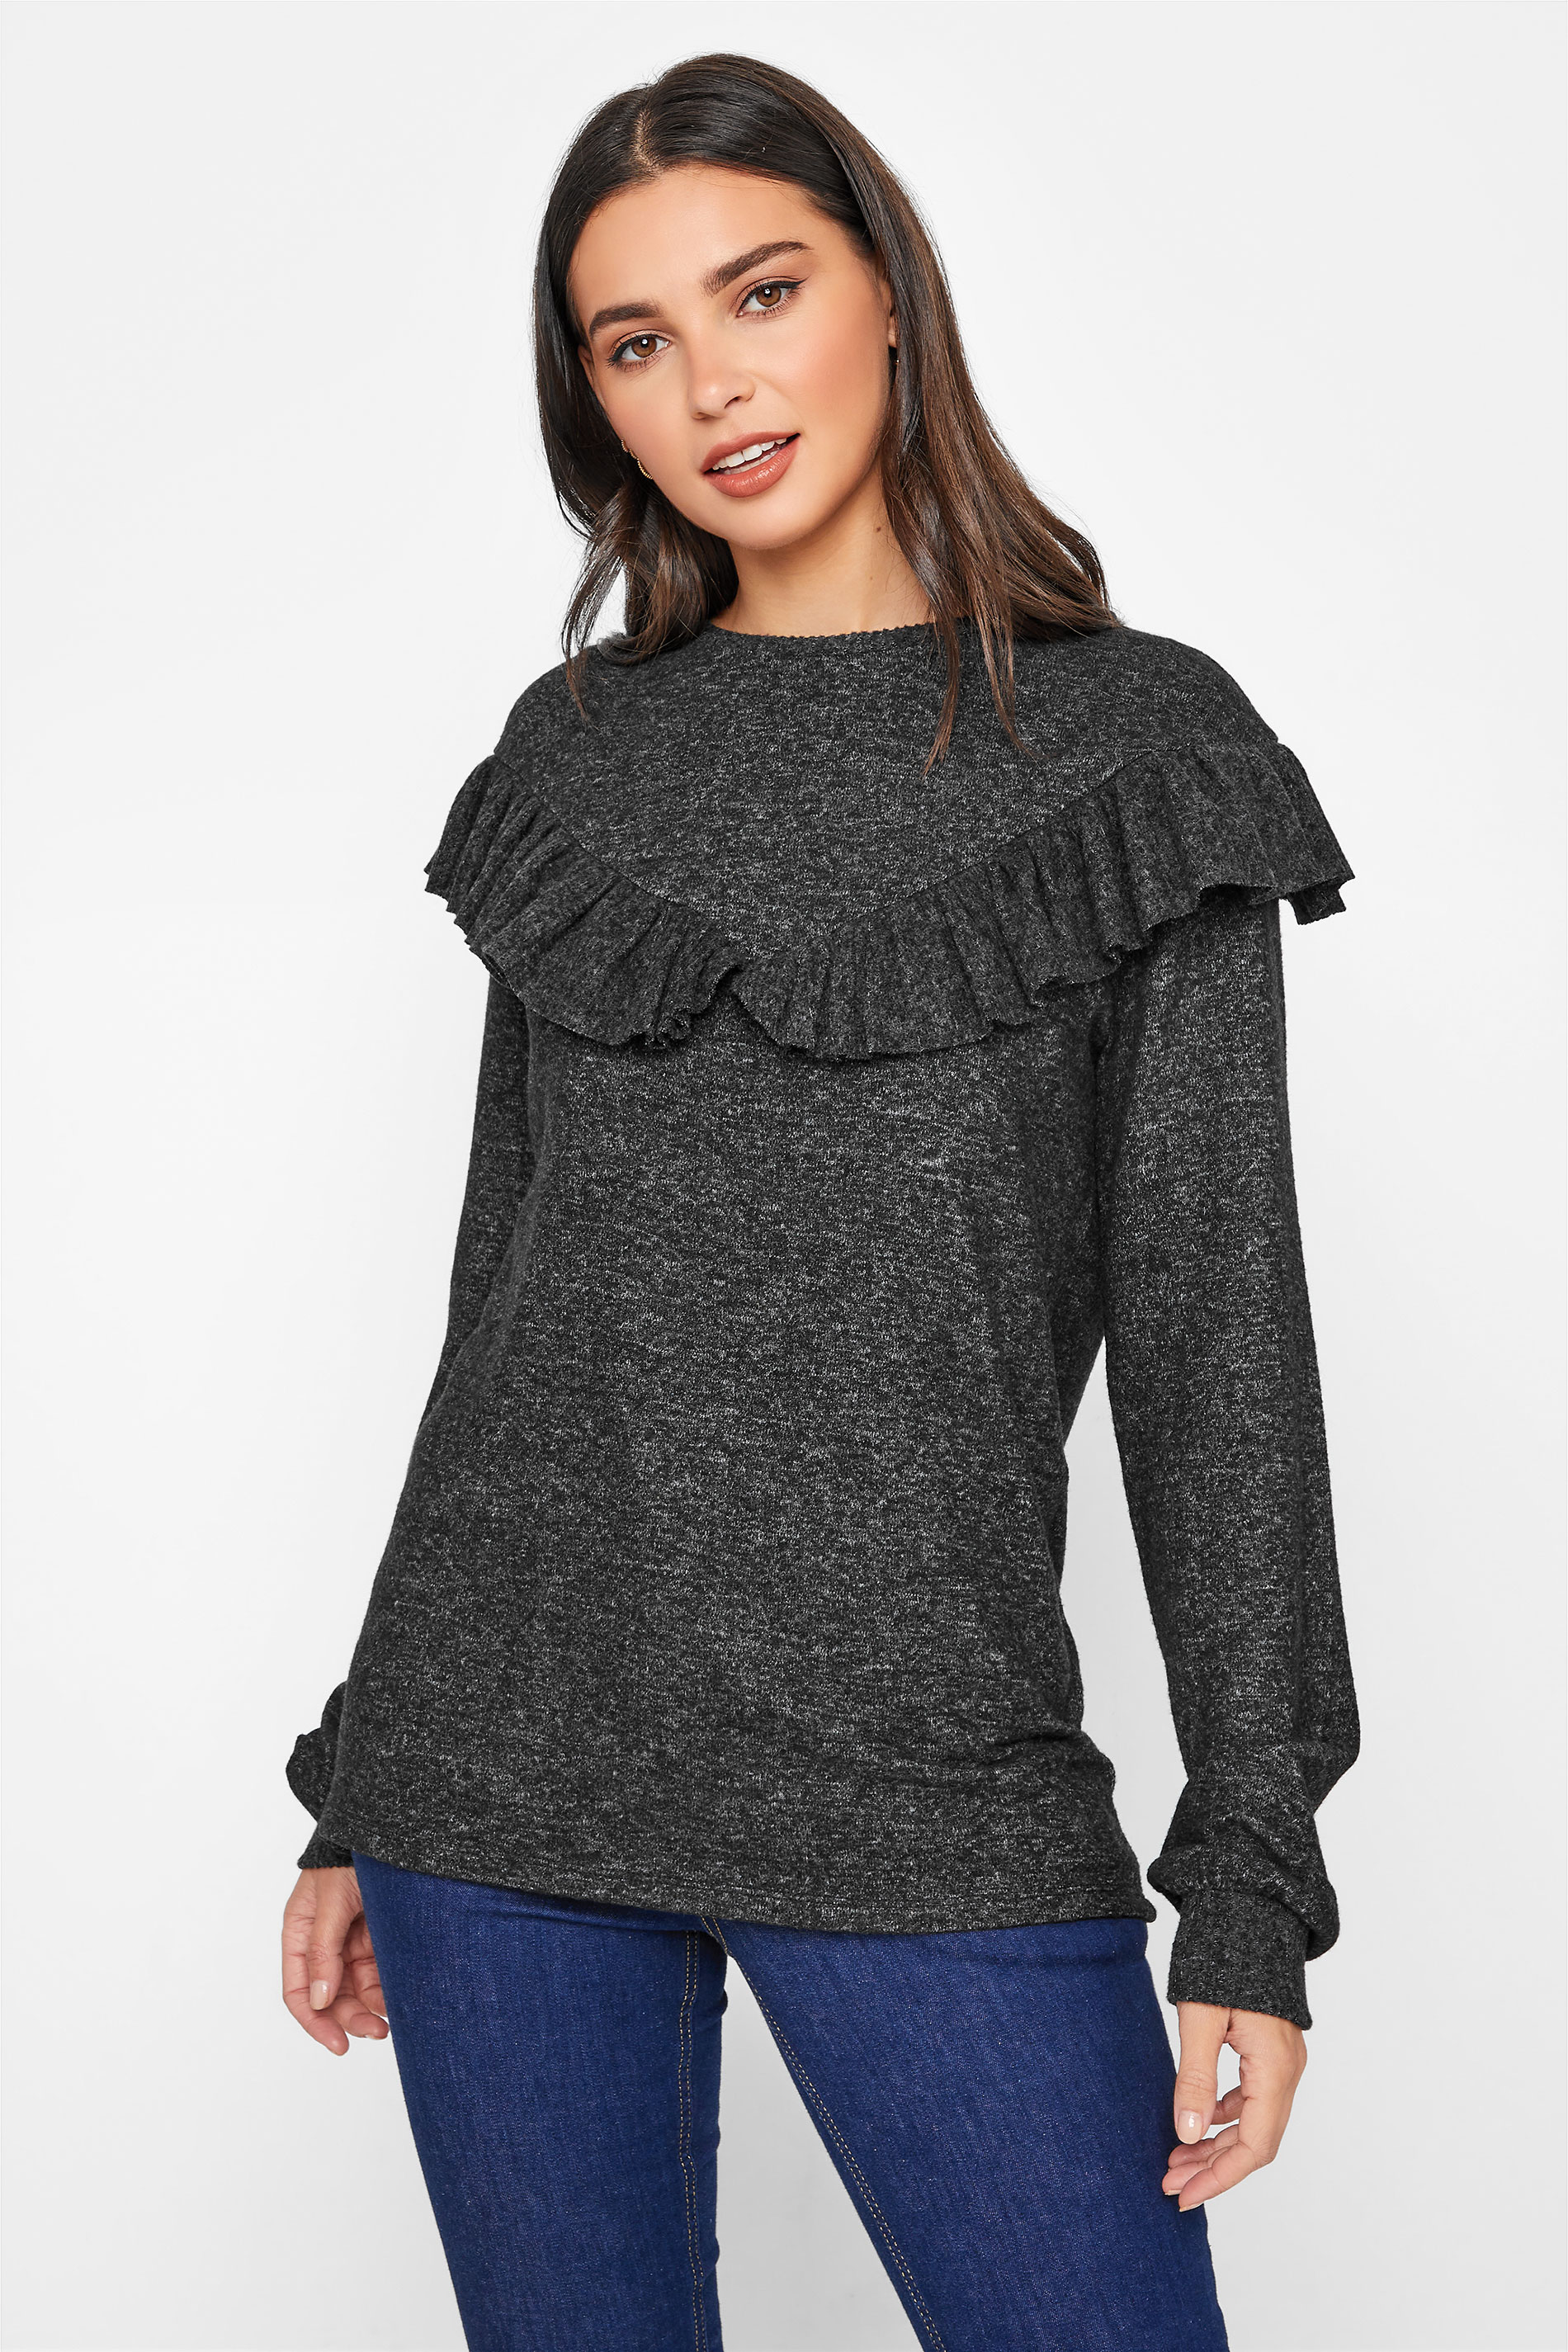 LTS Grey Soft Touch Frill Top_A.jpg